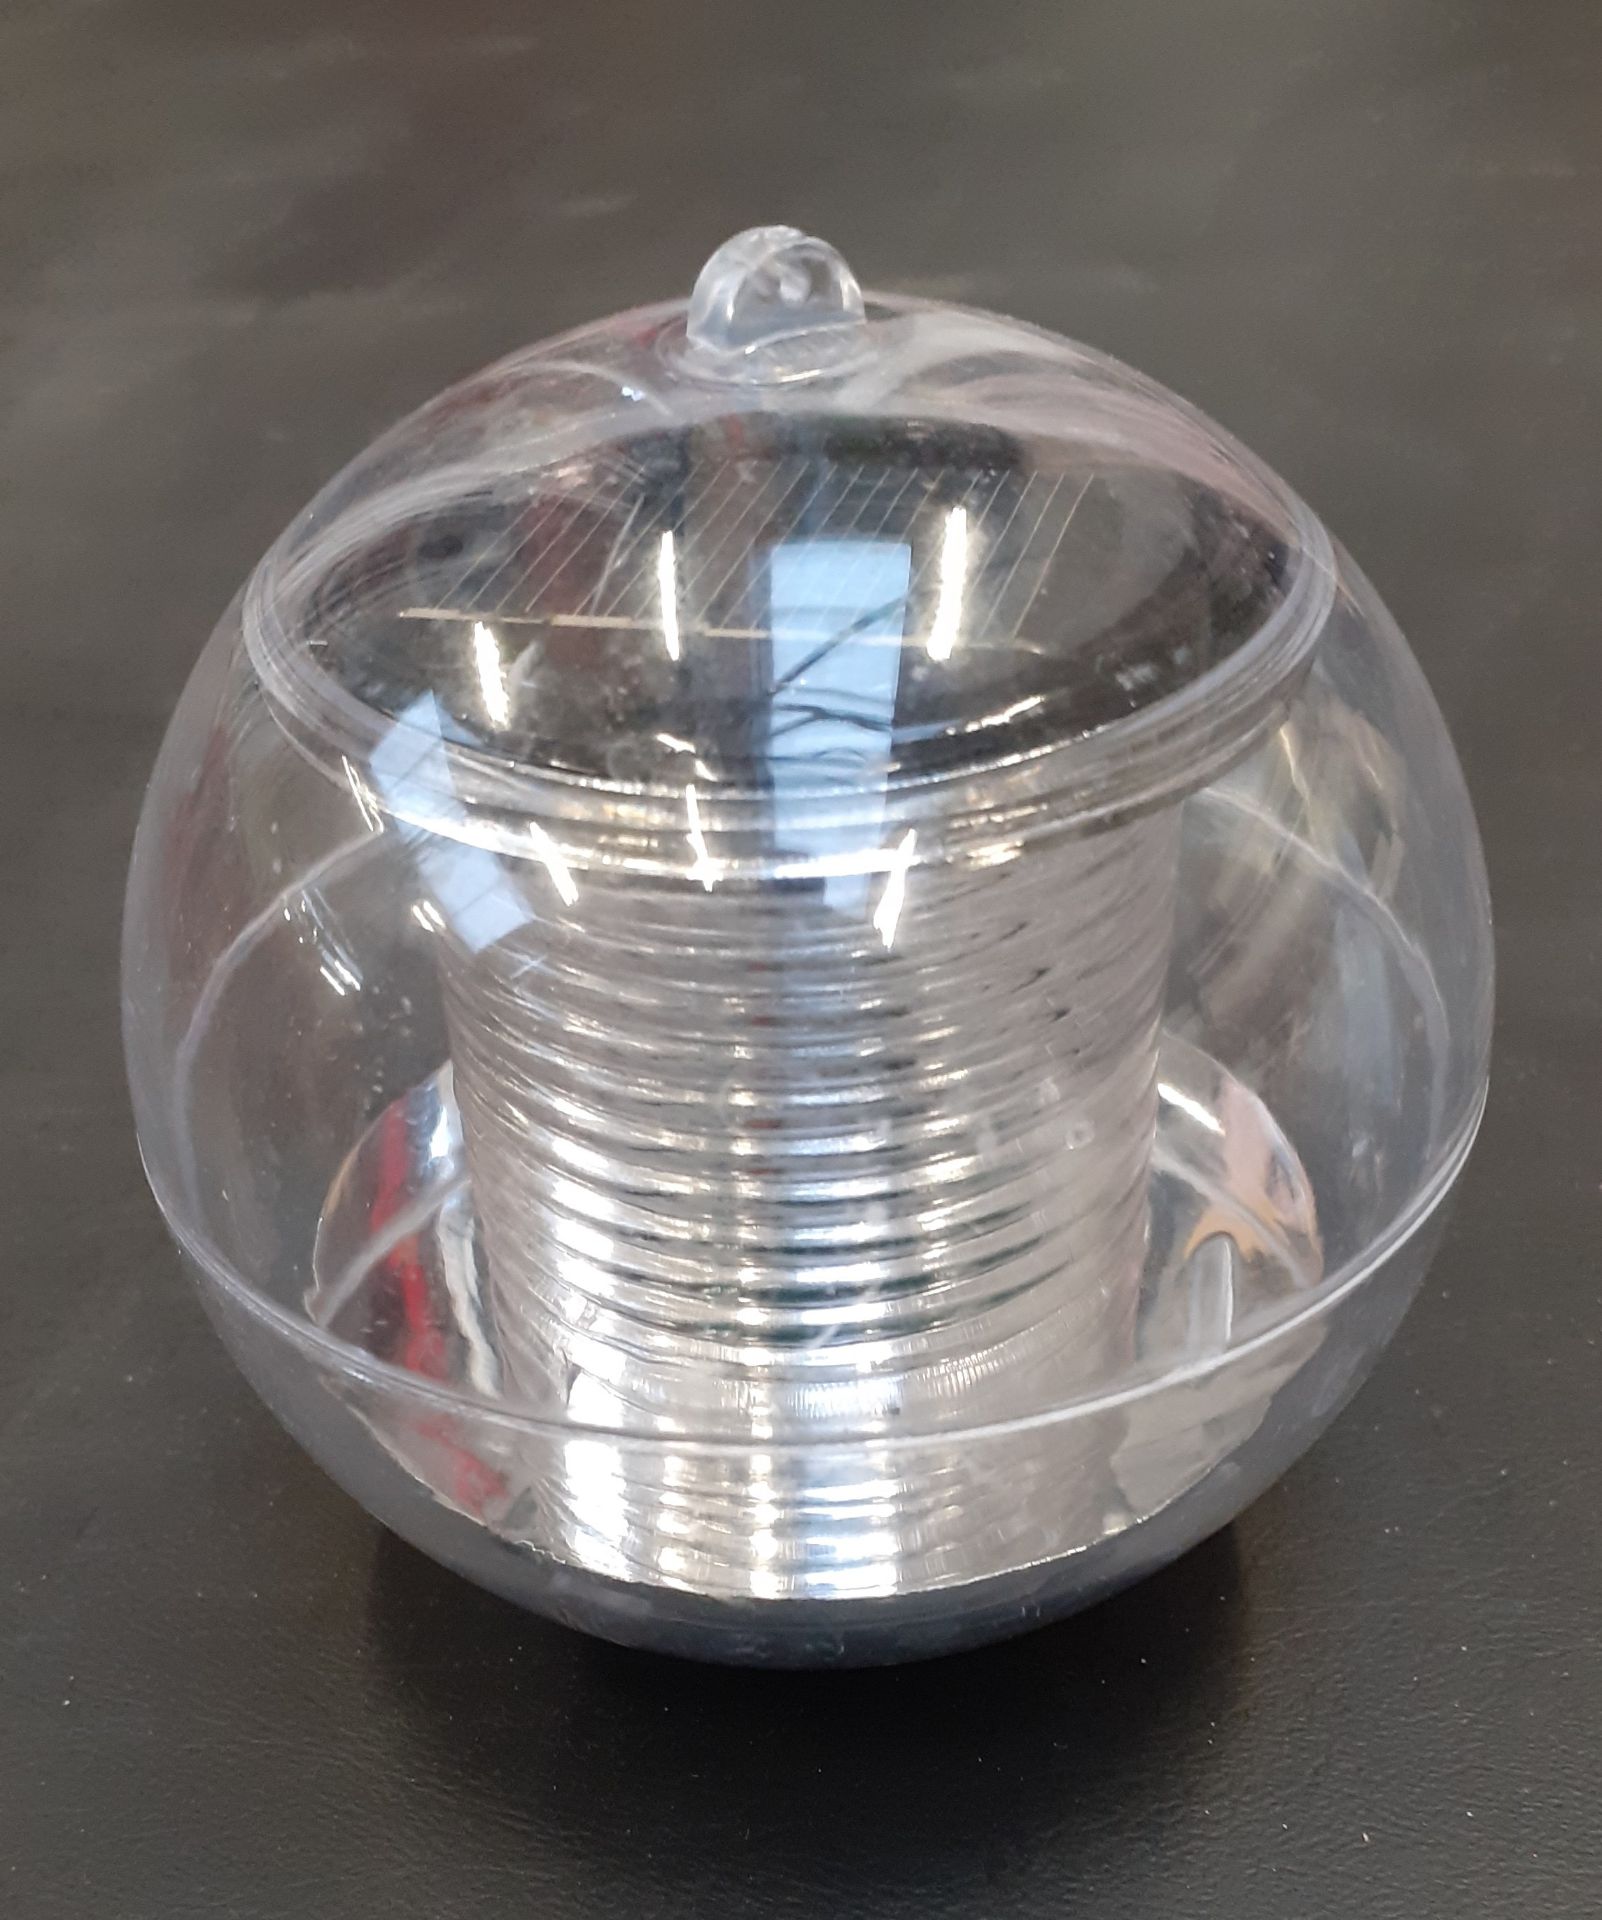 23 x Solar Powered Floating LED Ball Lights (excellent condition, used for one day only)(located